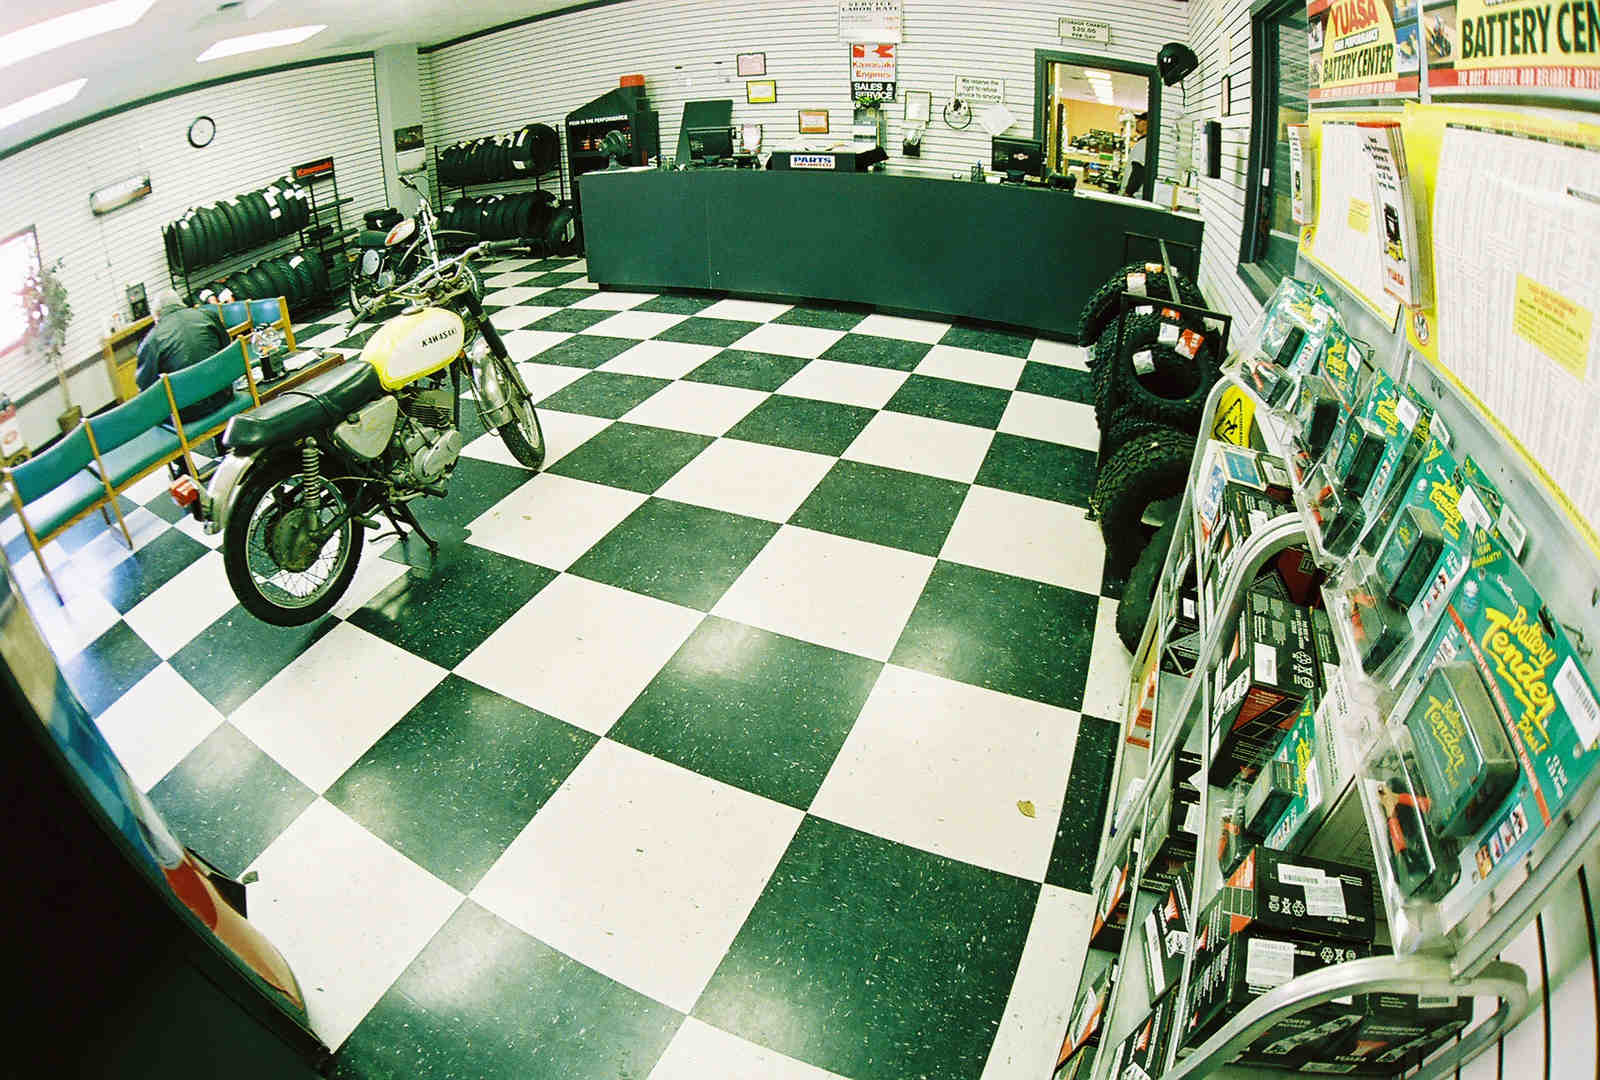 A black motorcycle parked in a service room with a black & white checkerboard pattern floor.